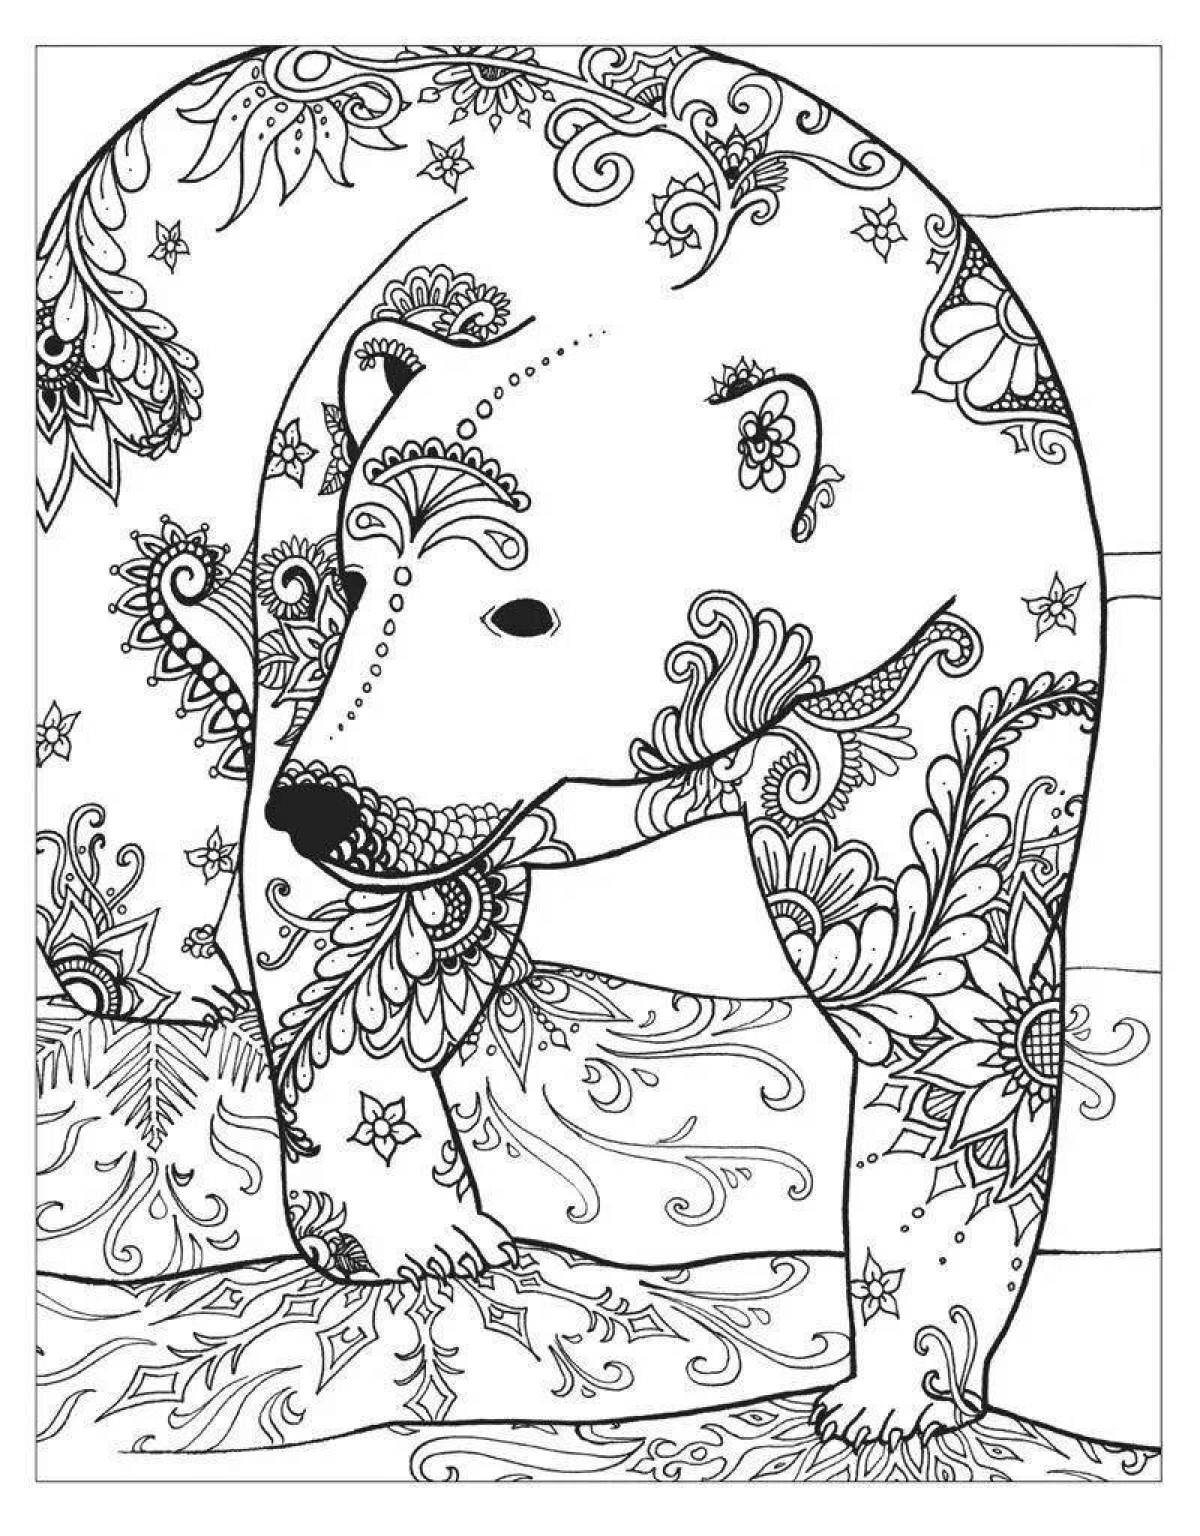 Sublime coloring page adult winter